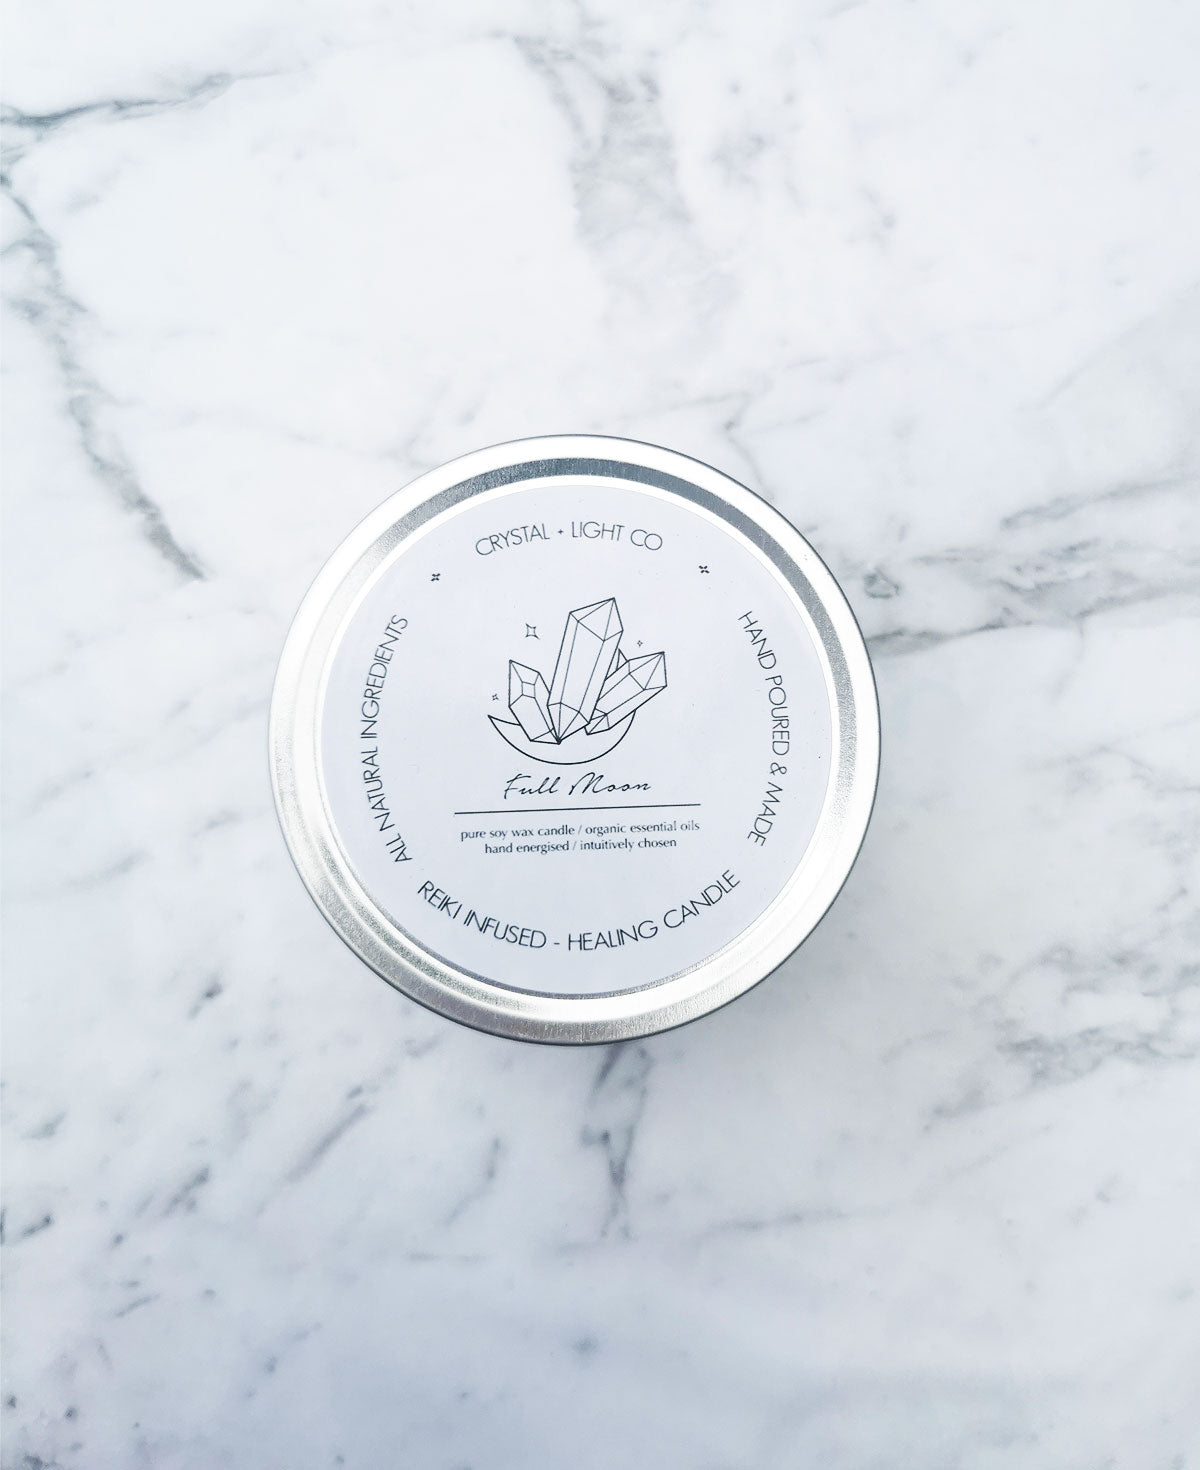 Full Moon - Wellbeing candle